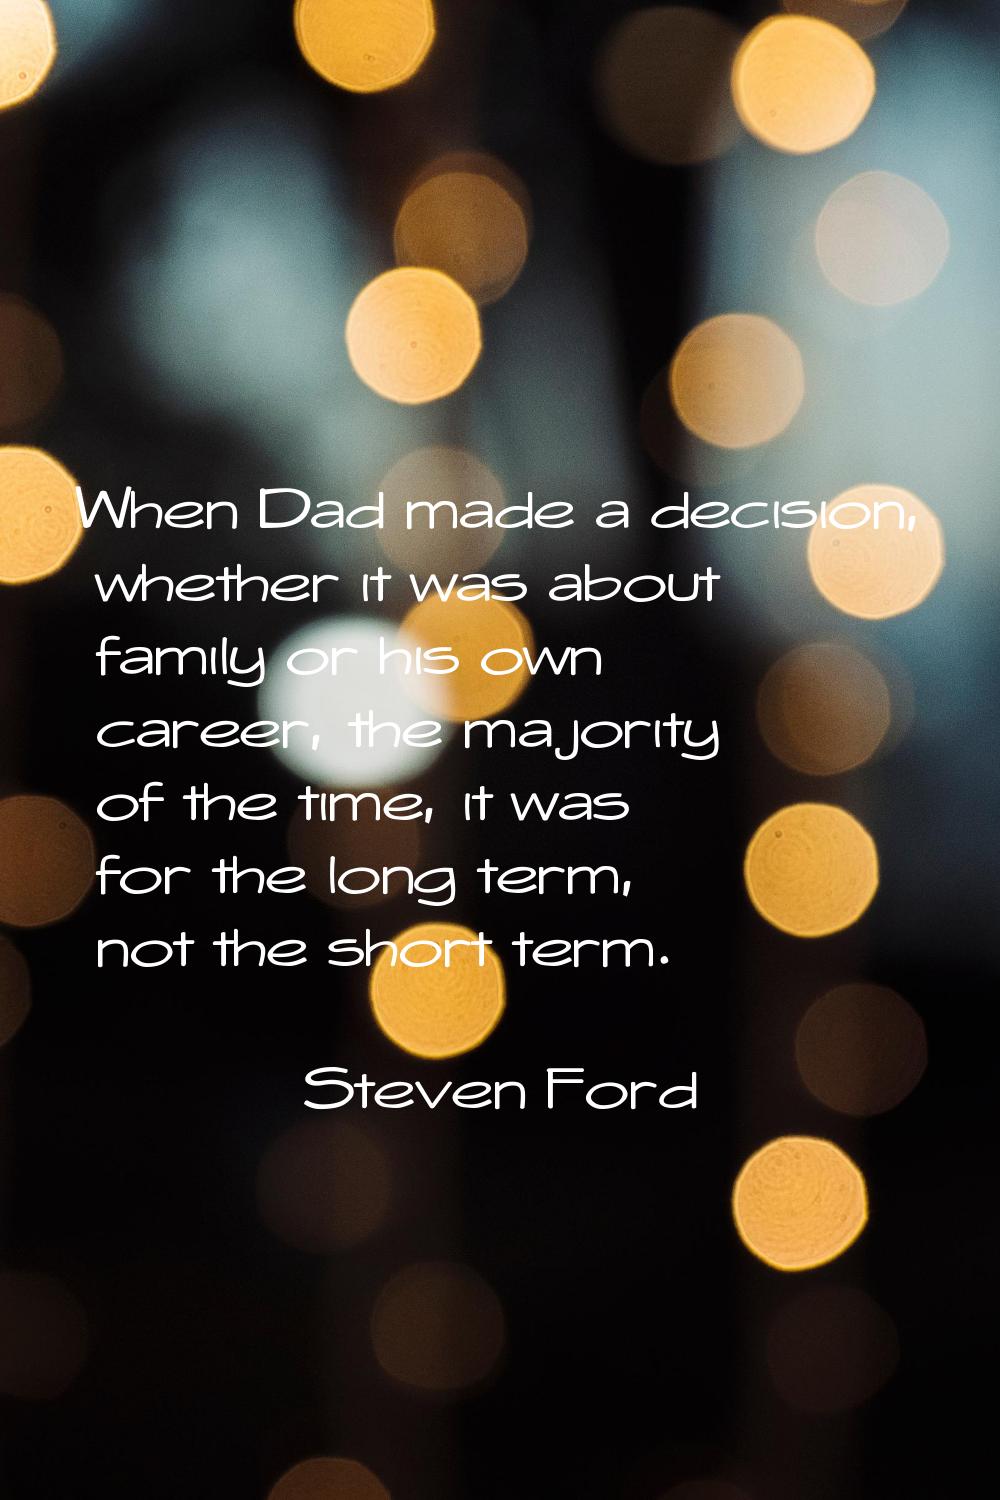 When Dad made a decision, whether it was about family or his own career, the majority of the time, 